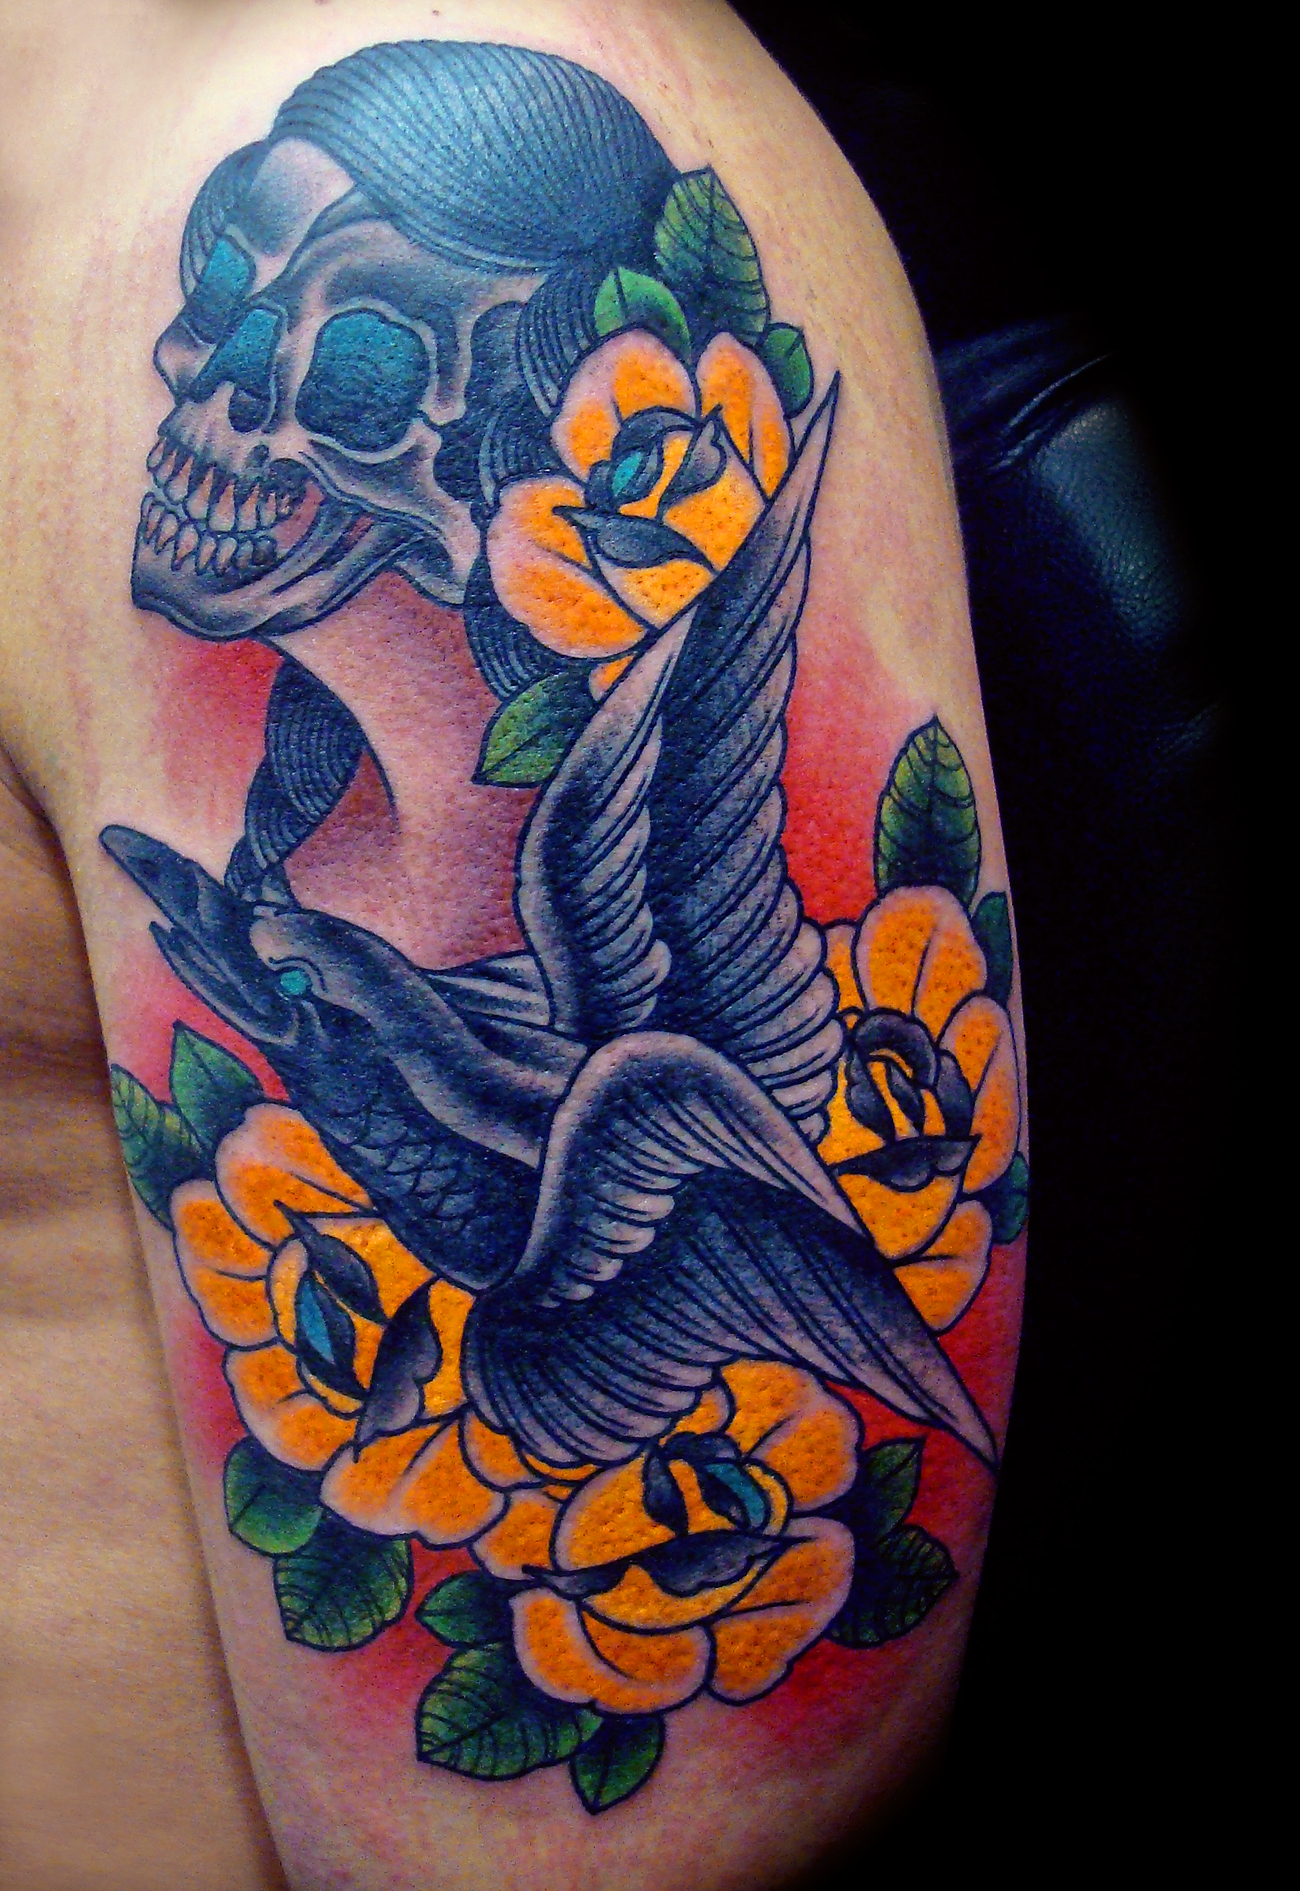 yellow roses with woman with skull face by javier rodriguez